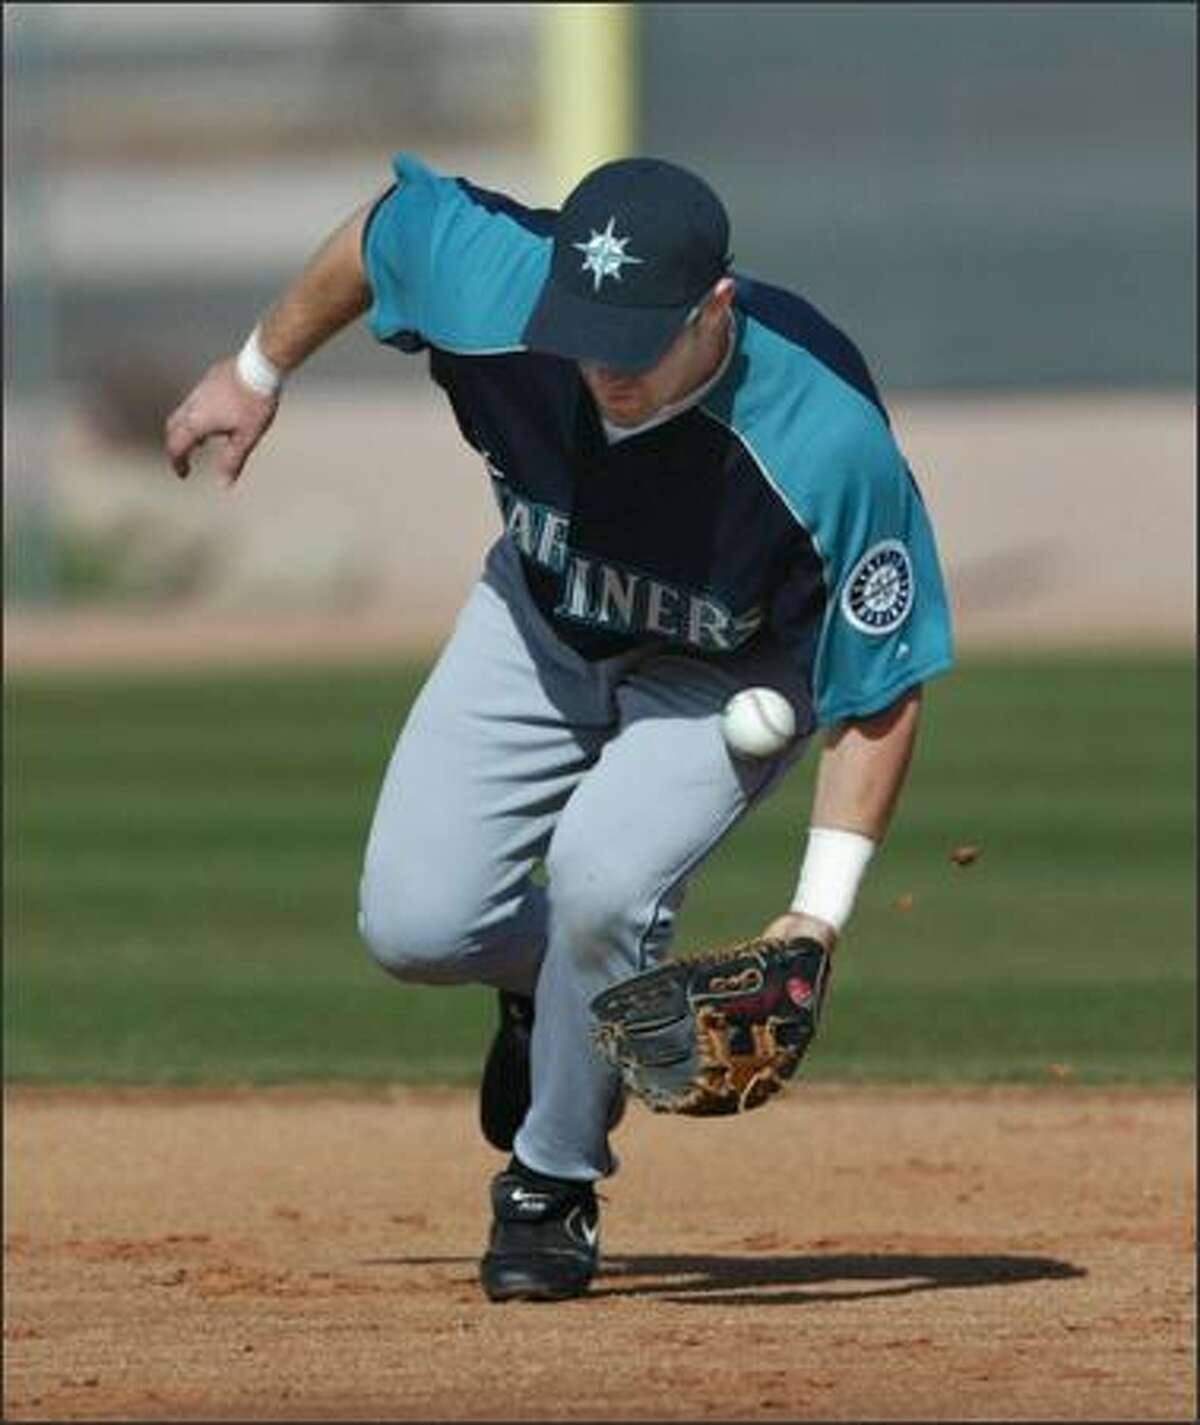 A hard infield caused some interesting hops as Willie Bloomquist found out while taking ground balls at shortstop.